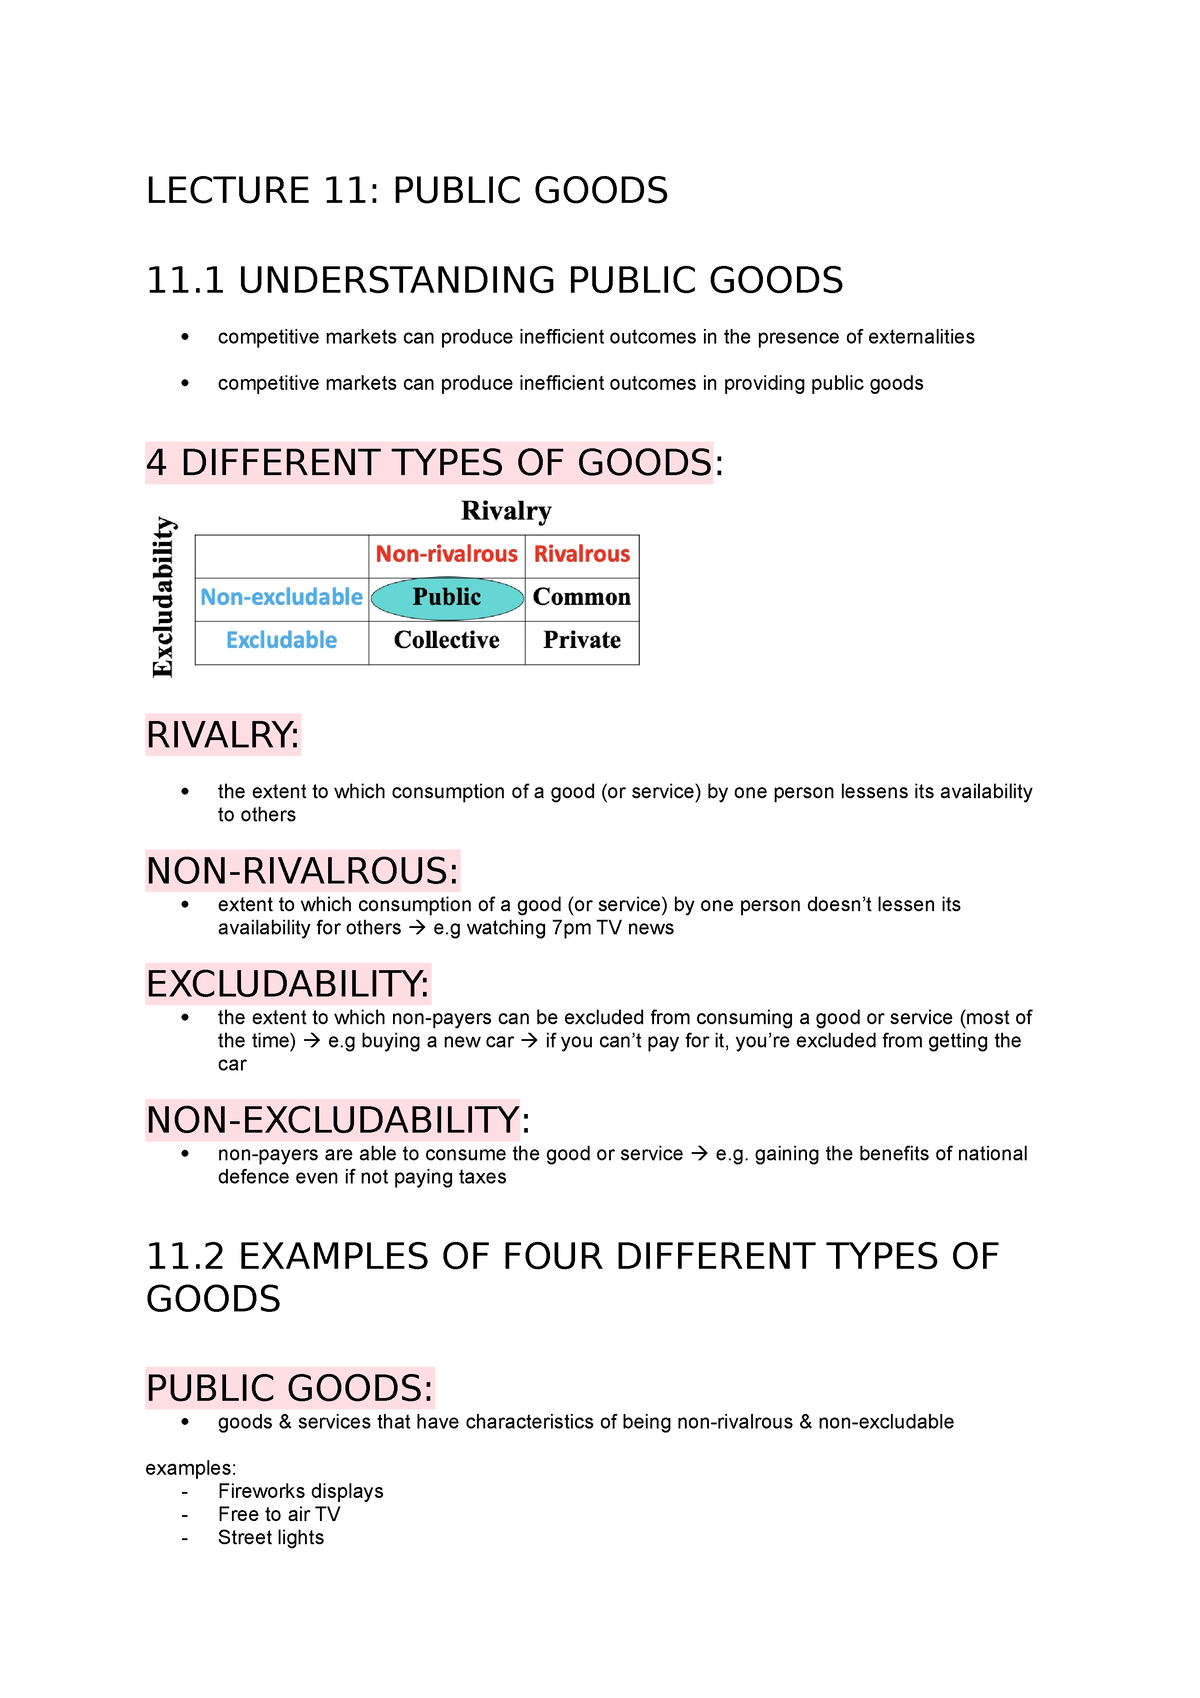 Public Goods: Non-Excludability, E.G. Street Lights and National Defence